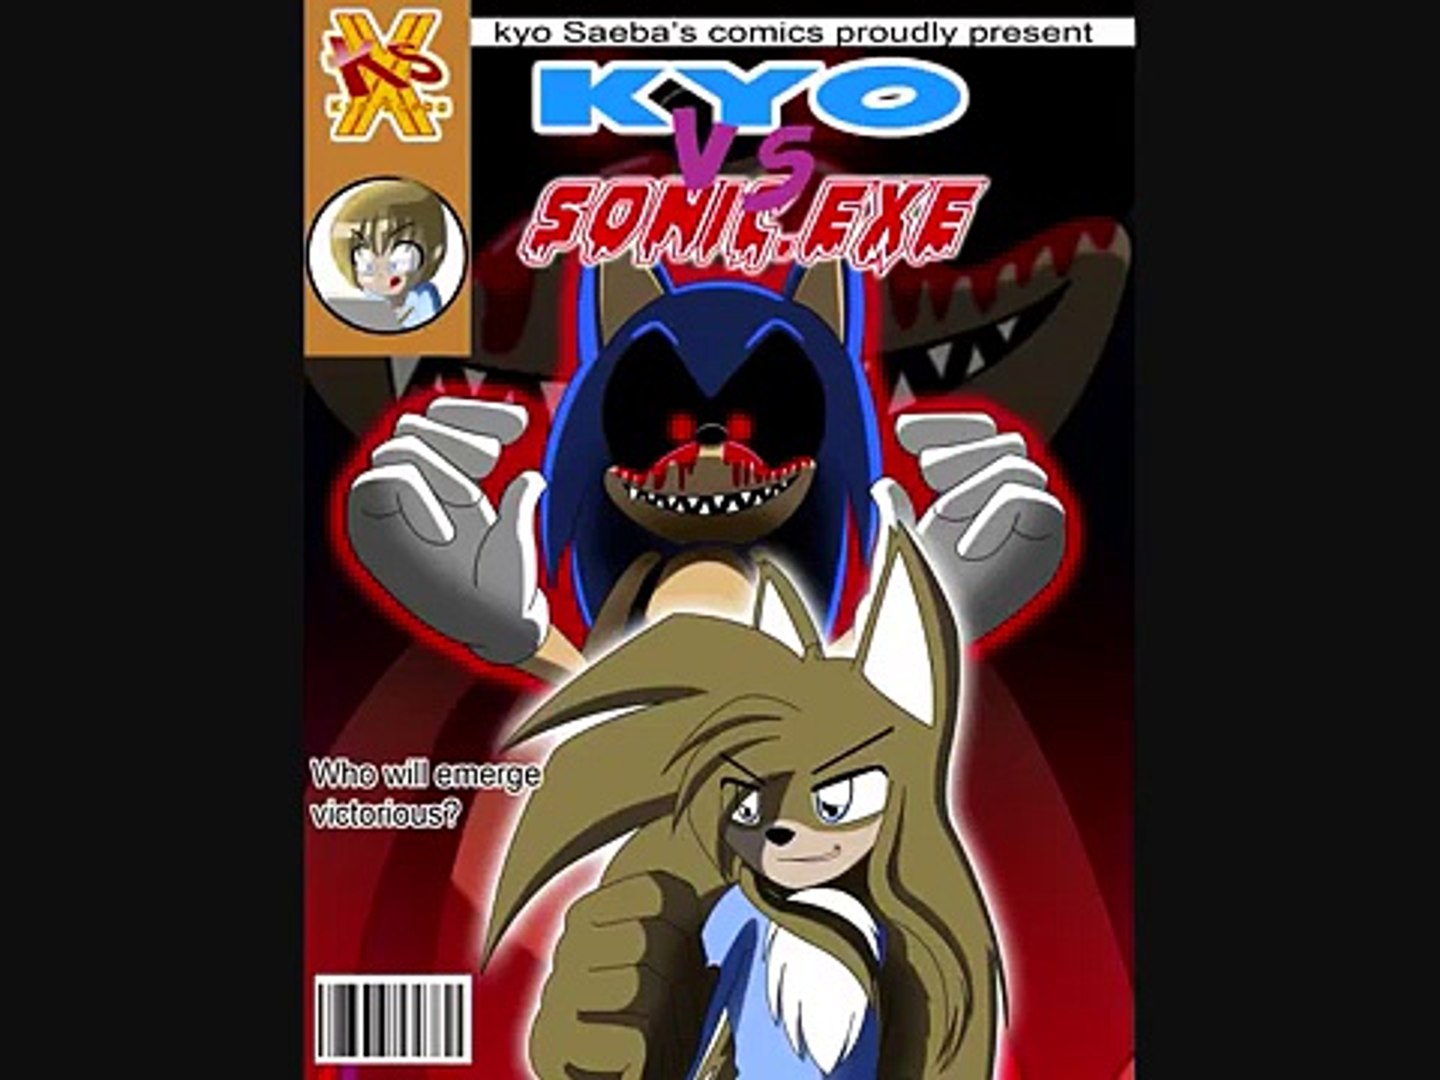 ROUND2.EXE Version 2 - A GOOD ENDING TO THE SONIC.EXE SAGA [Sonic.exe Round  2 Extended Version] – Видео Dailymotion